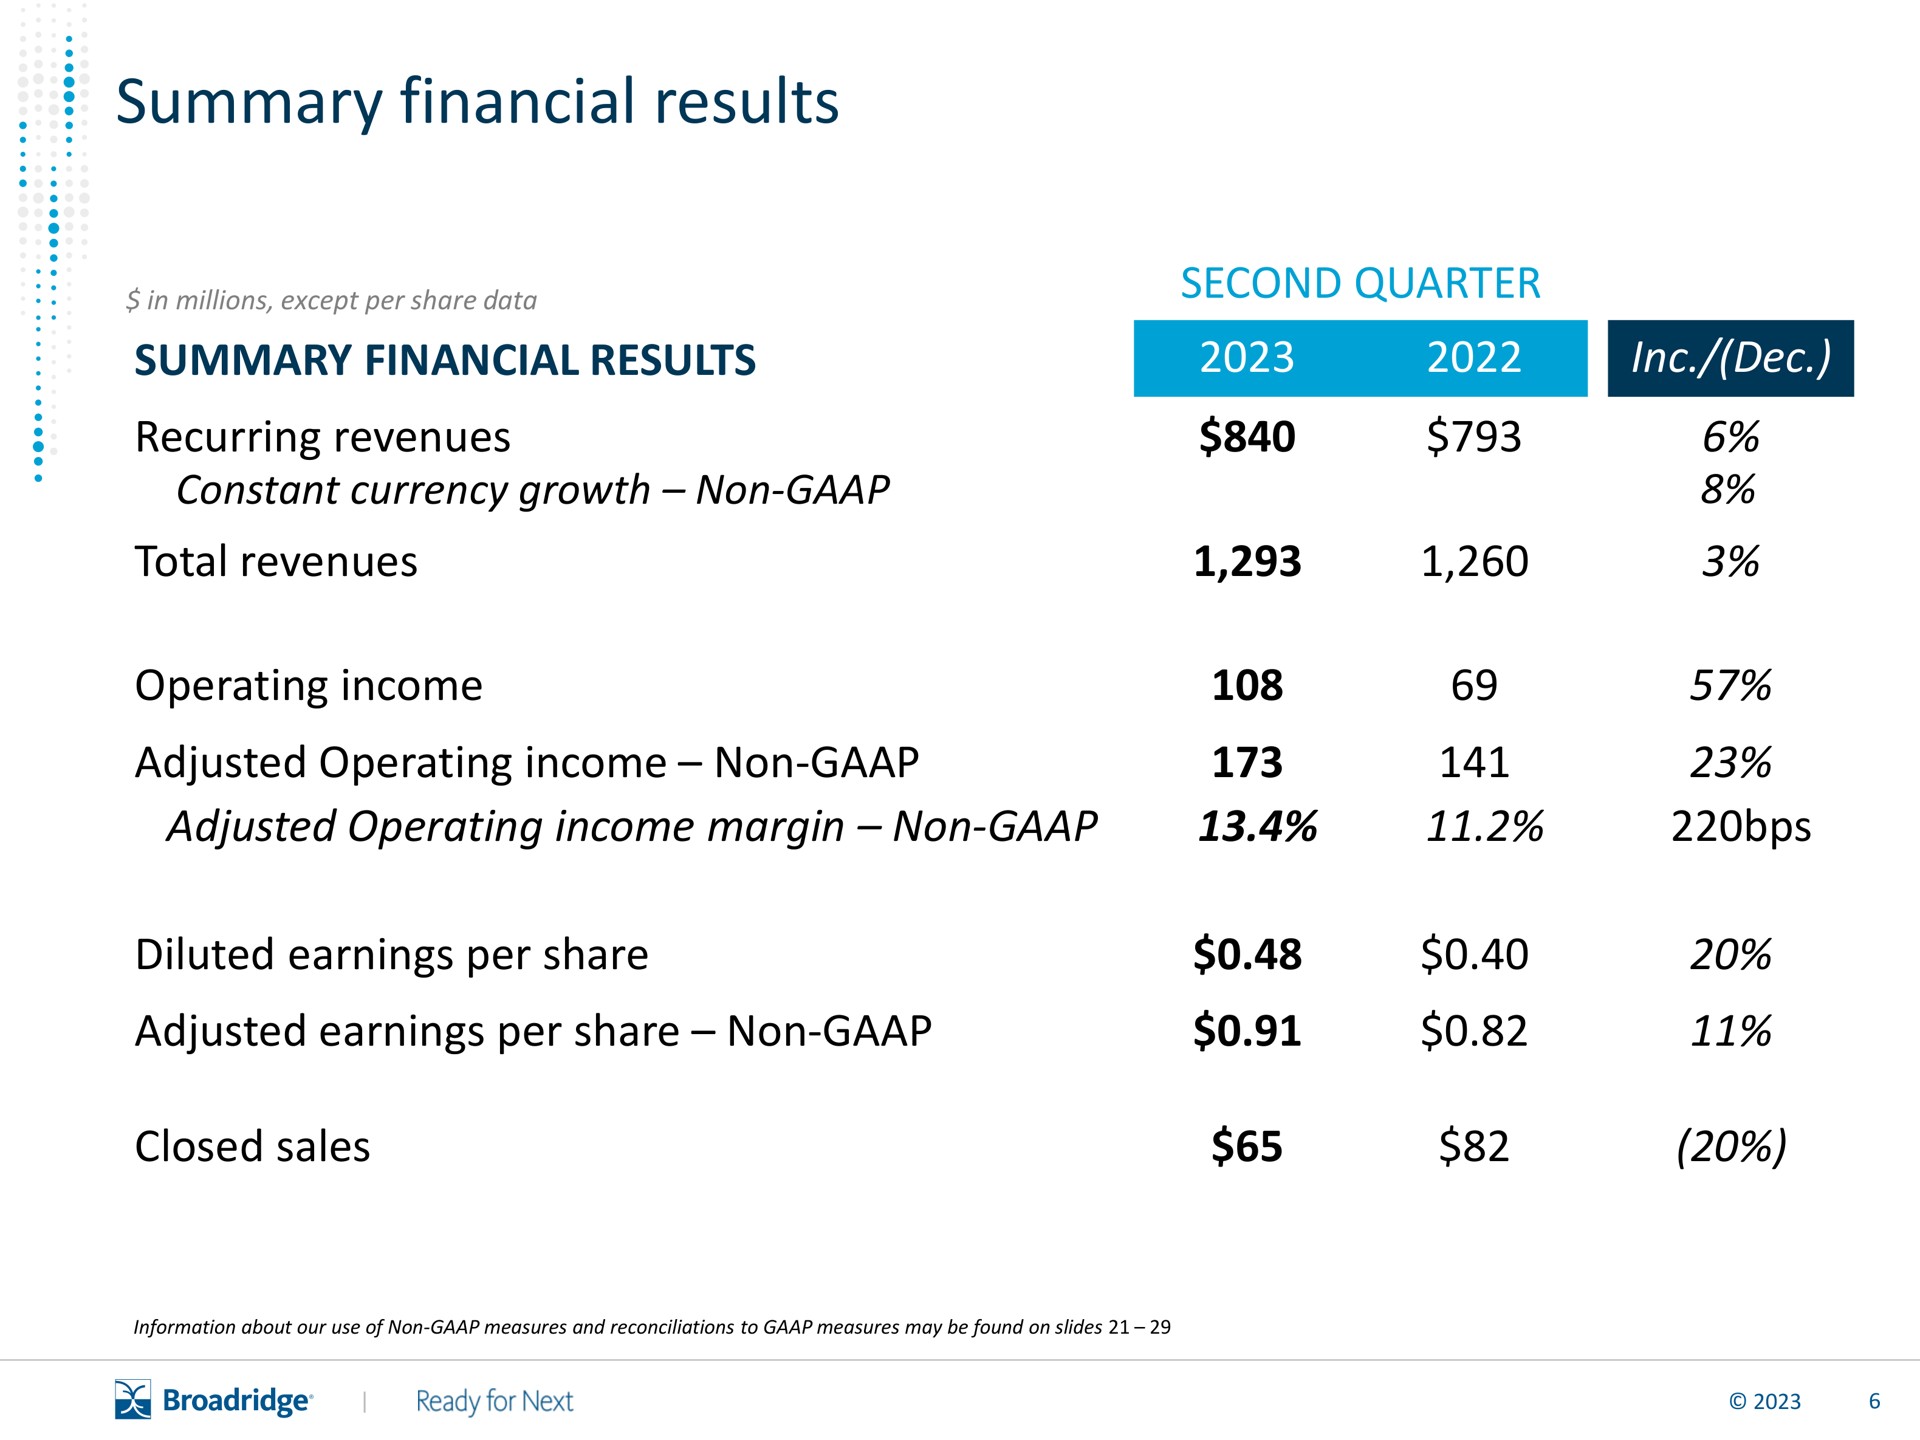 summary financial results adjusted earnings per share non closed sales | Broadridge Financial Solutions